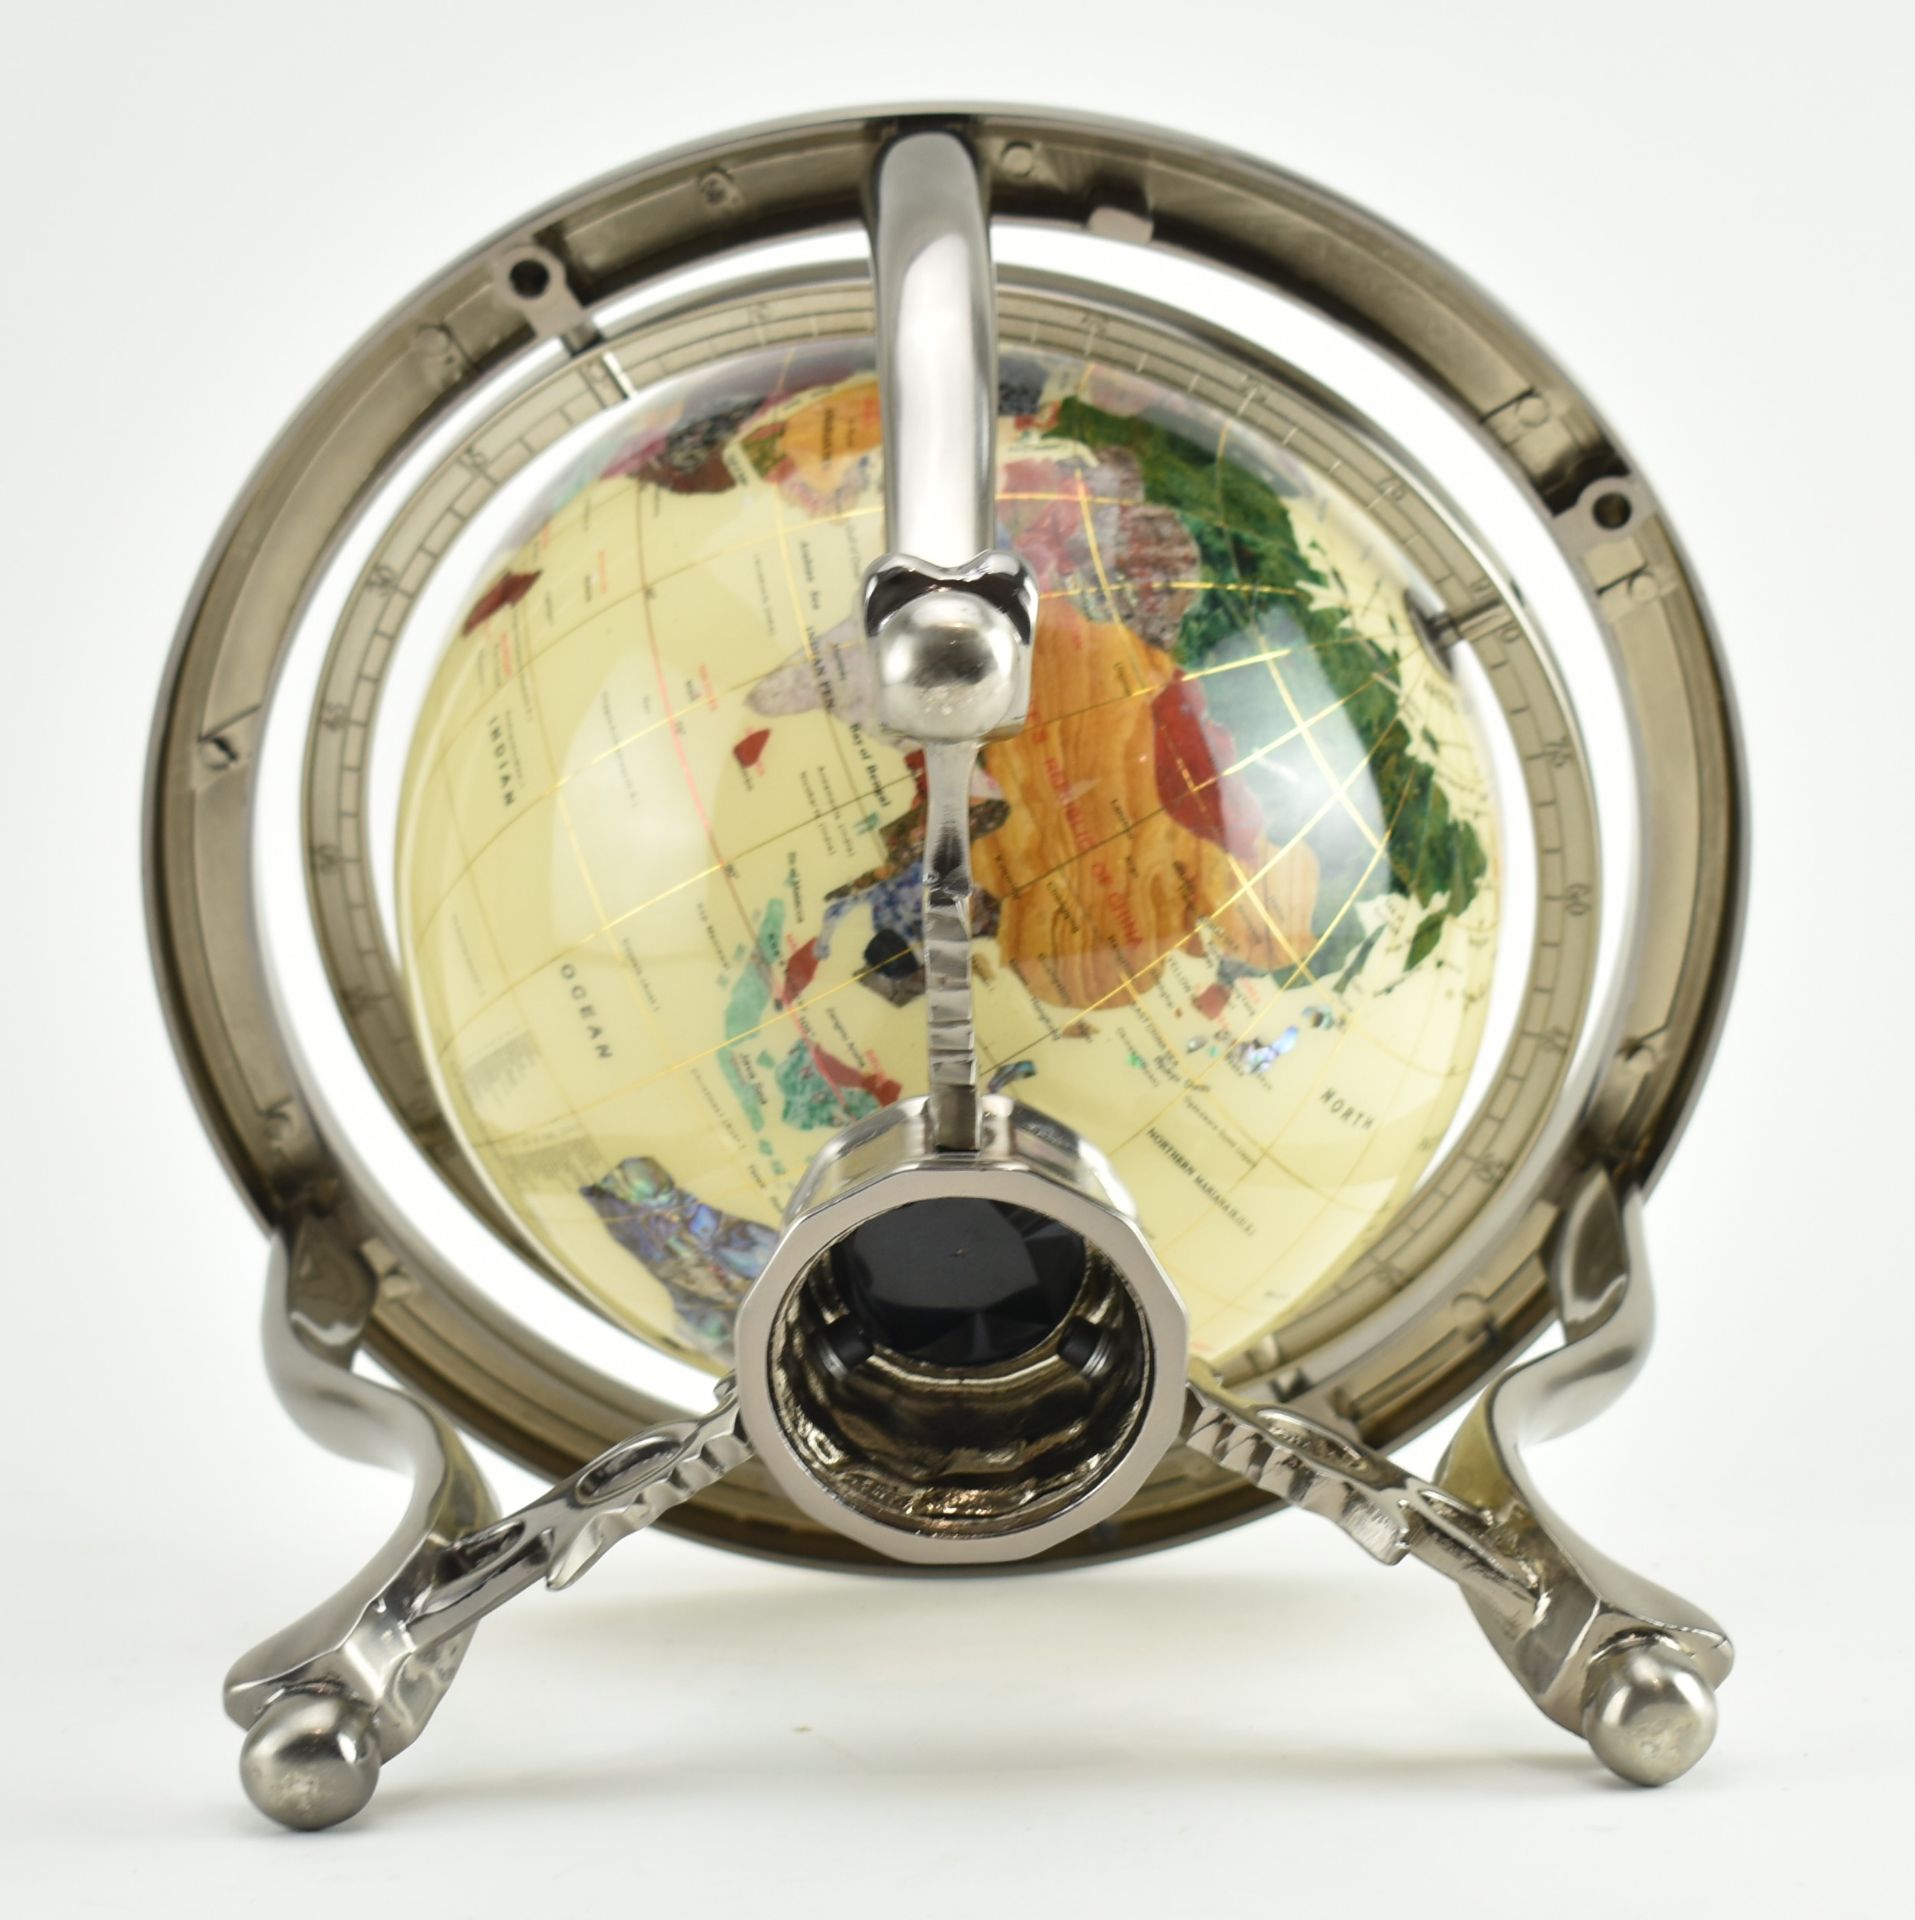 VINTAGE GEM INLAID GLOBE IN CHROME STAND - Image 7 of 7